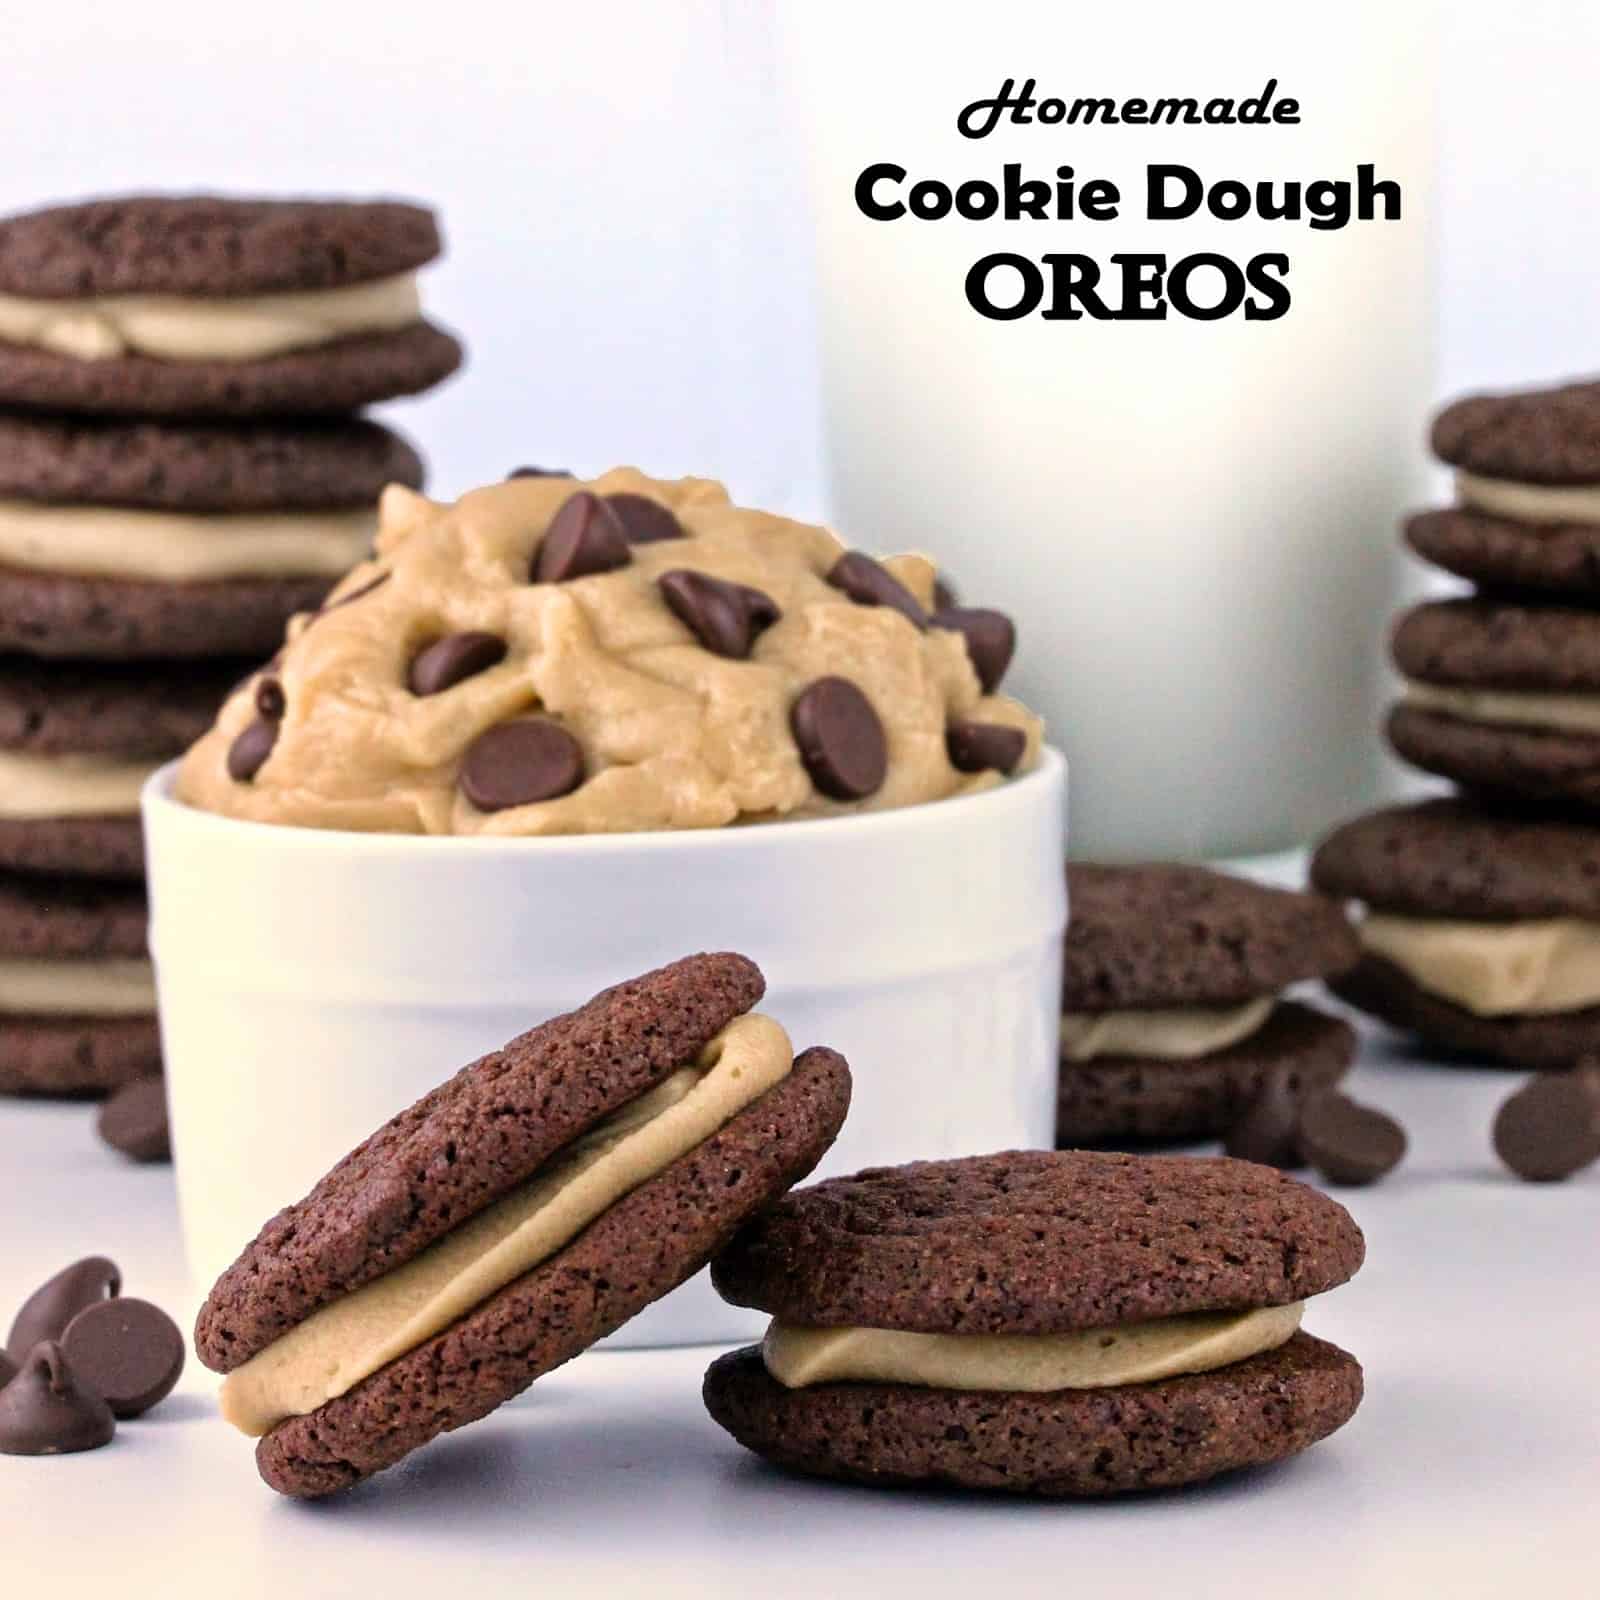 Homemade Cookie Dough Oreos: Homemade cookie dough layered between made from scratch "oreo" cookies